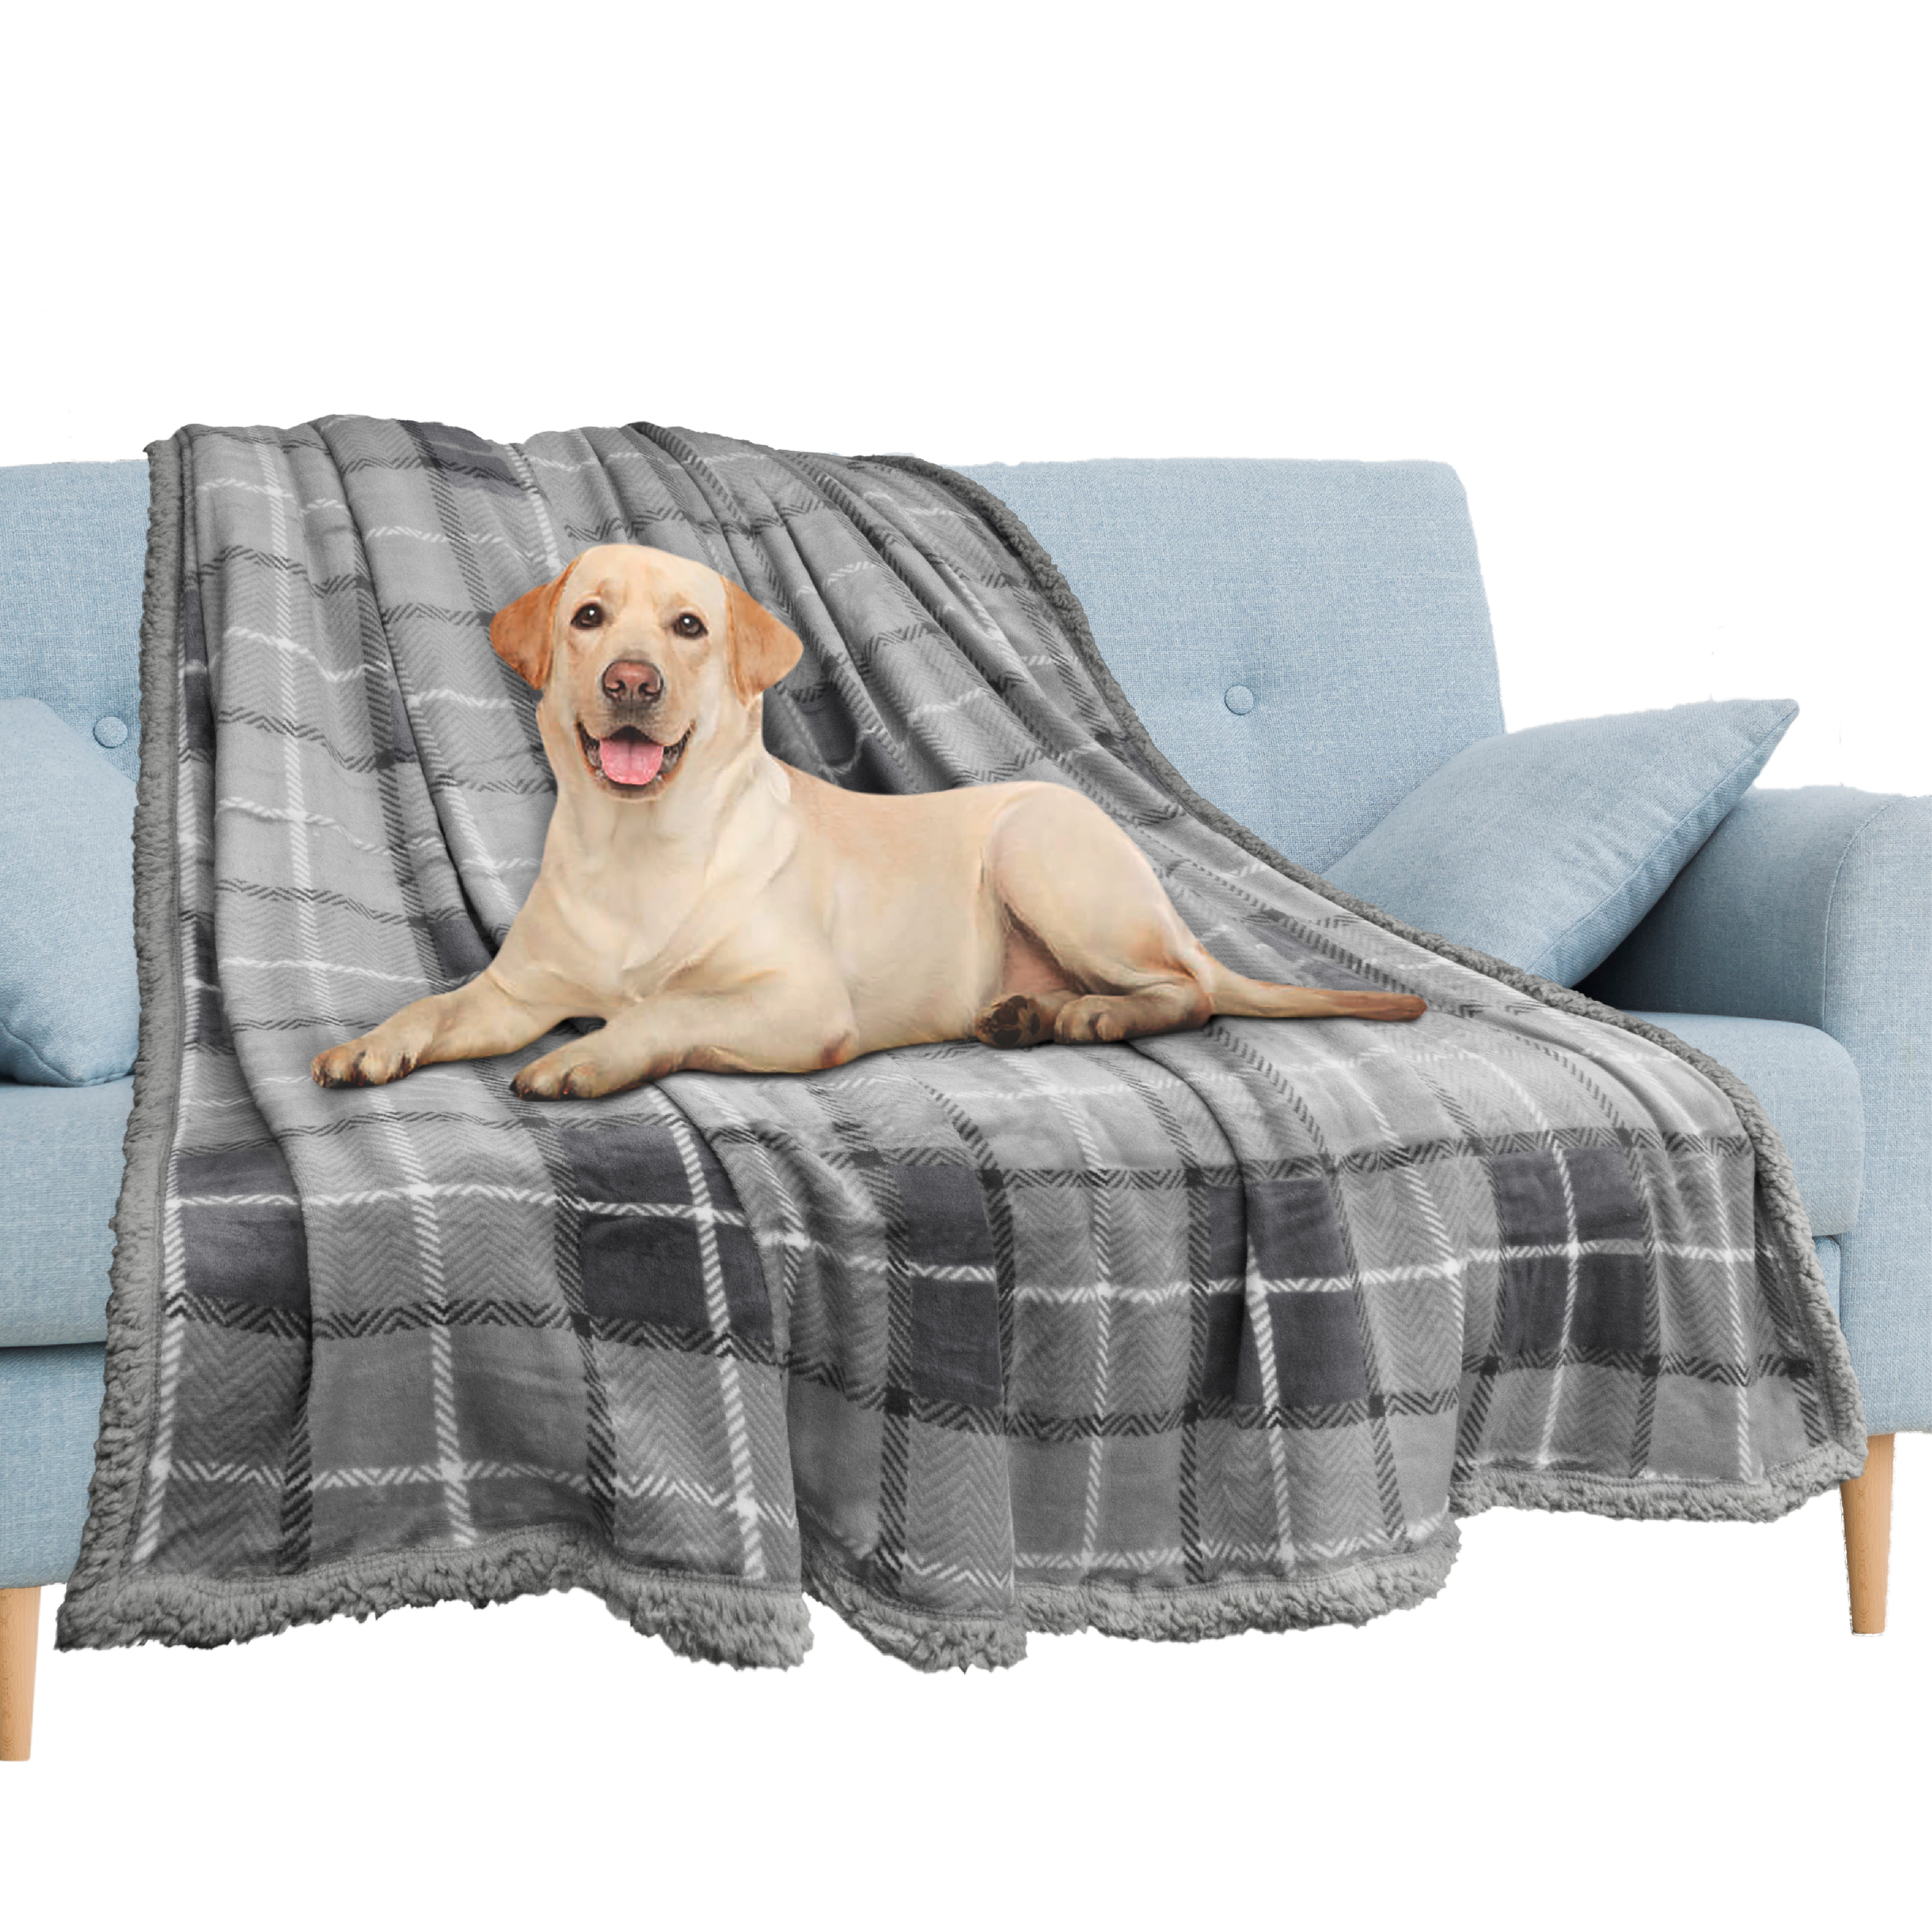 Waterproof Pee Proof Dog Blanket for Bed Couch Sofa, Buffalo Plaid